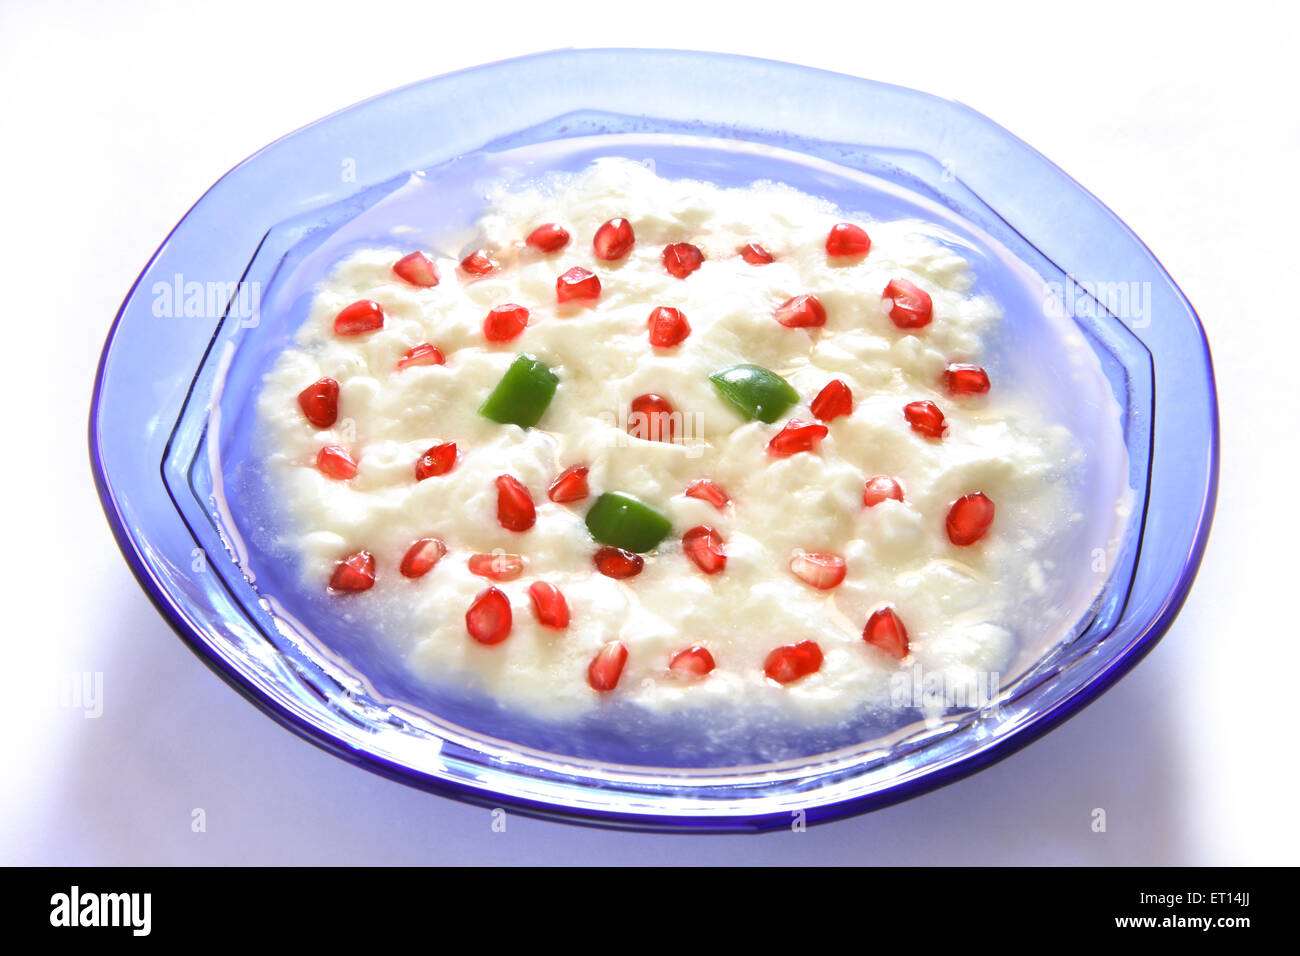 Fruit salad , pomegranate and curd with green capsicum in blue round bowl on white background Stock Photo